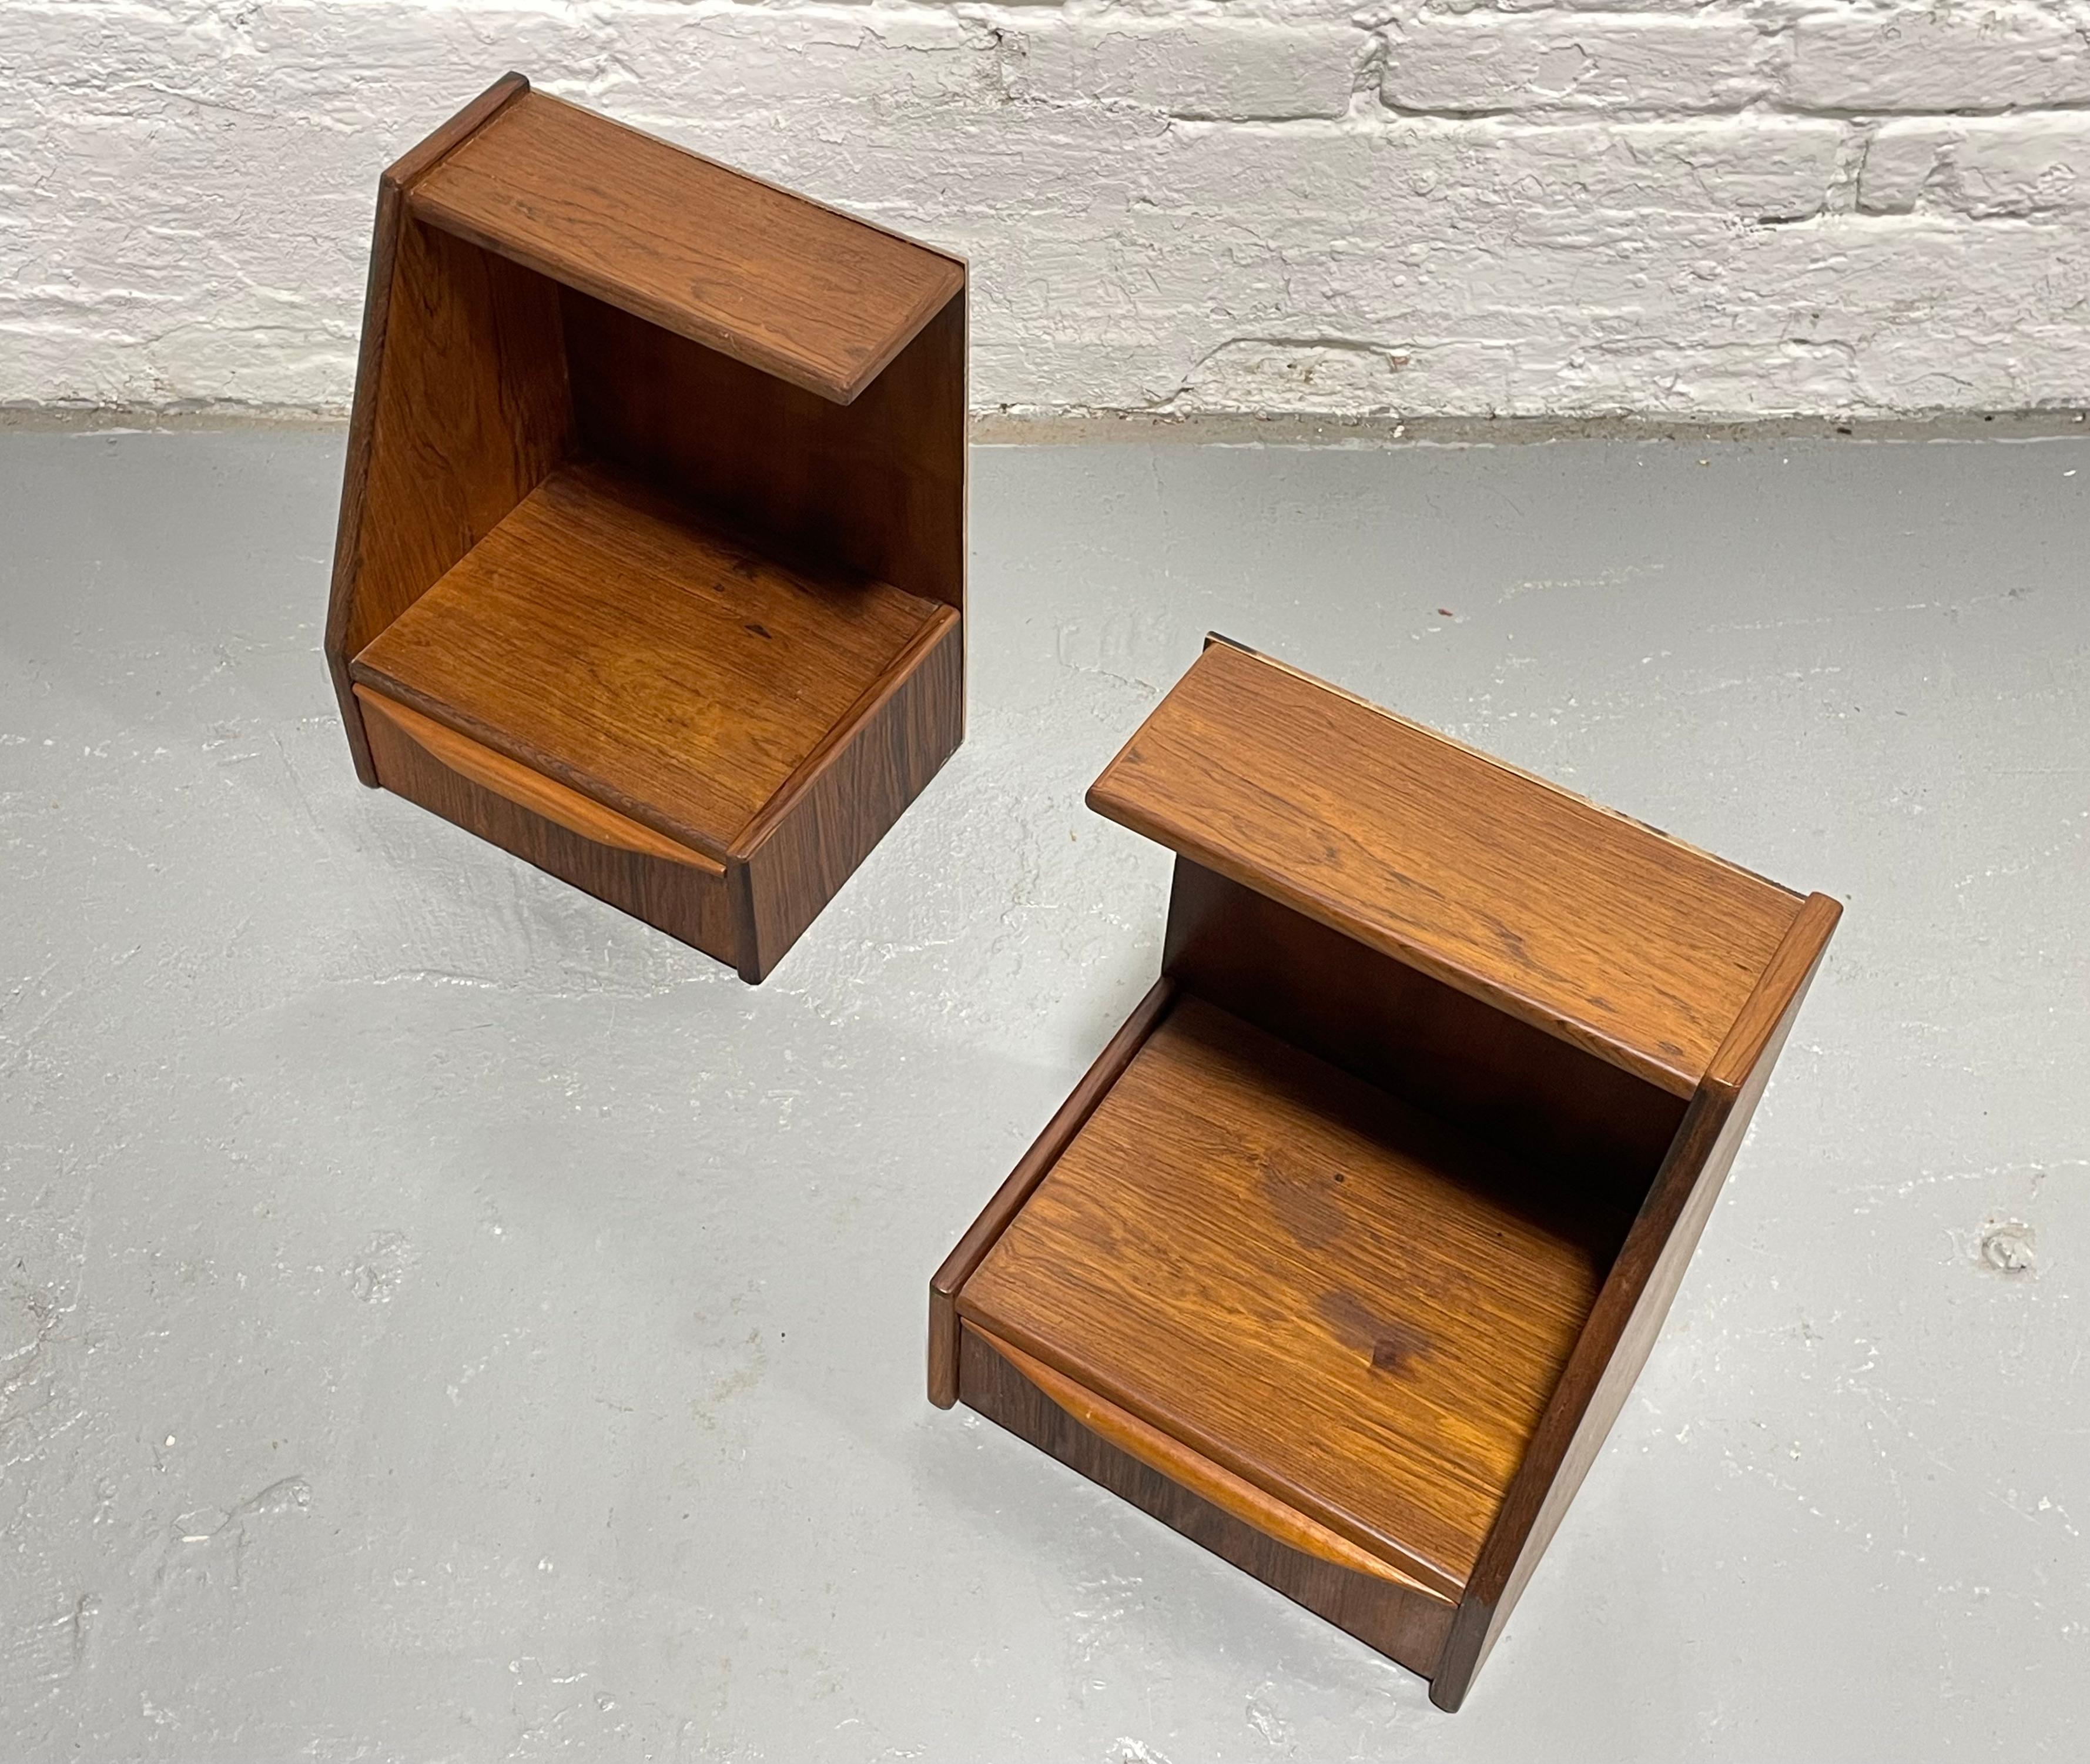 DANISH Mid Century Modern ROSEWOOD Hanging NIGHTSTANDS / Bedside Tables, c. 1950 For Sale 2